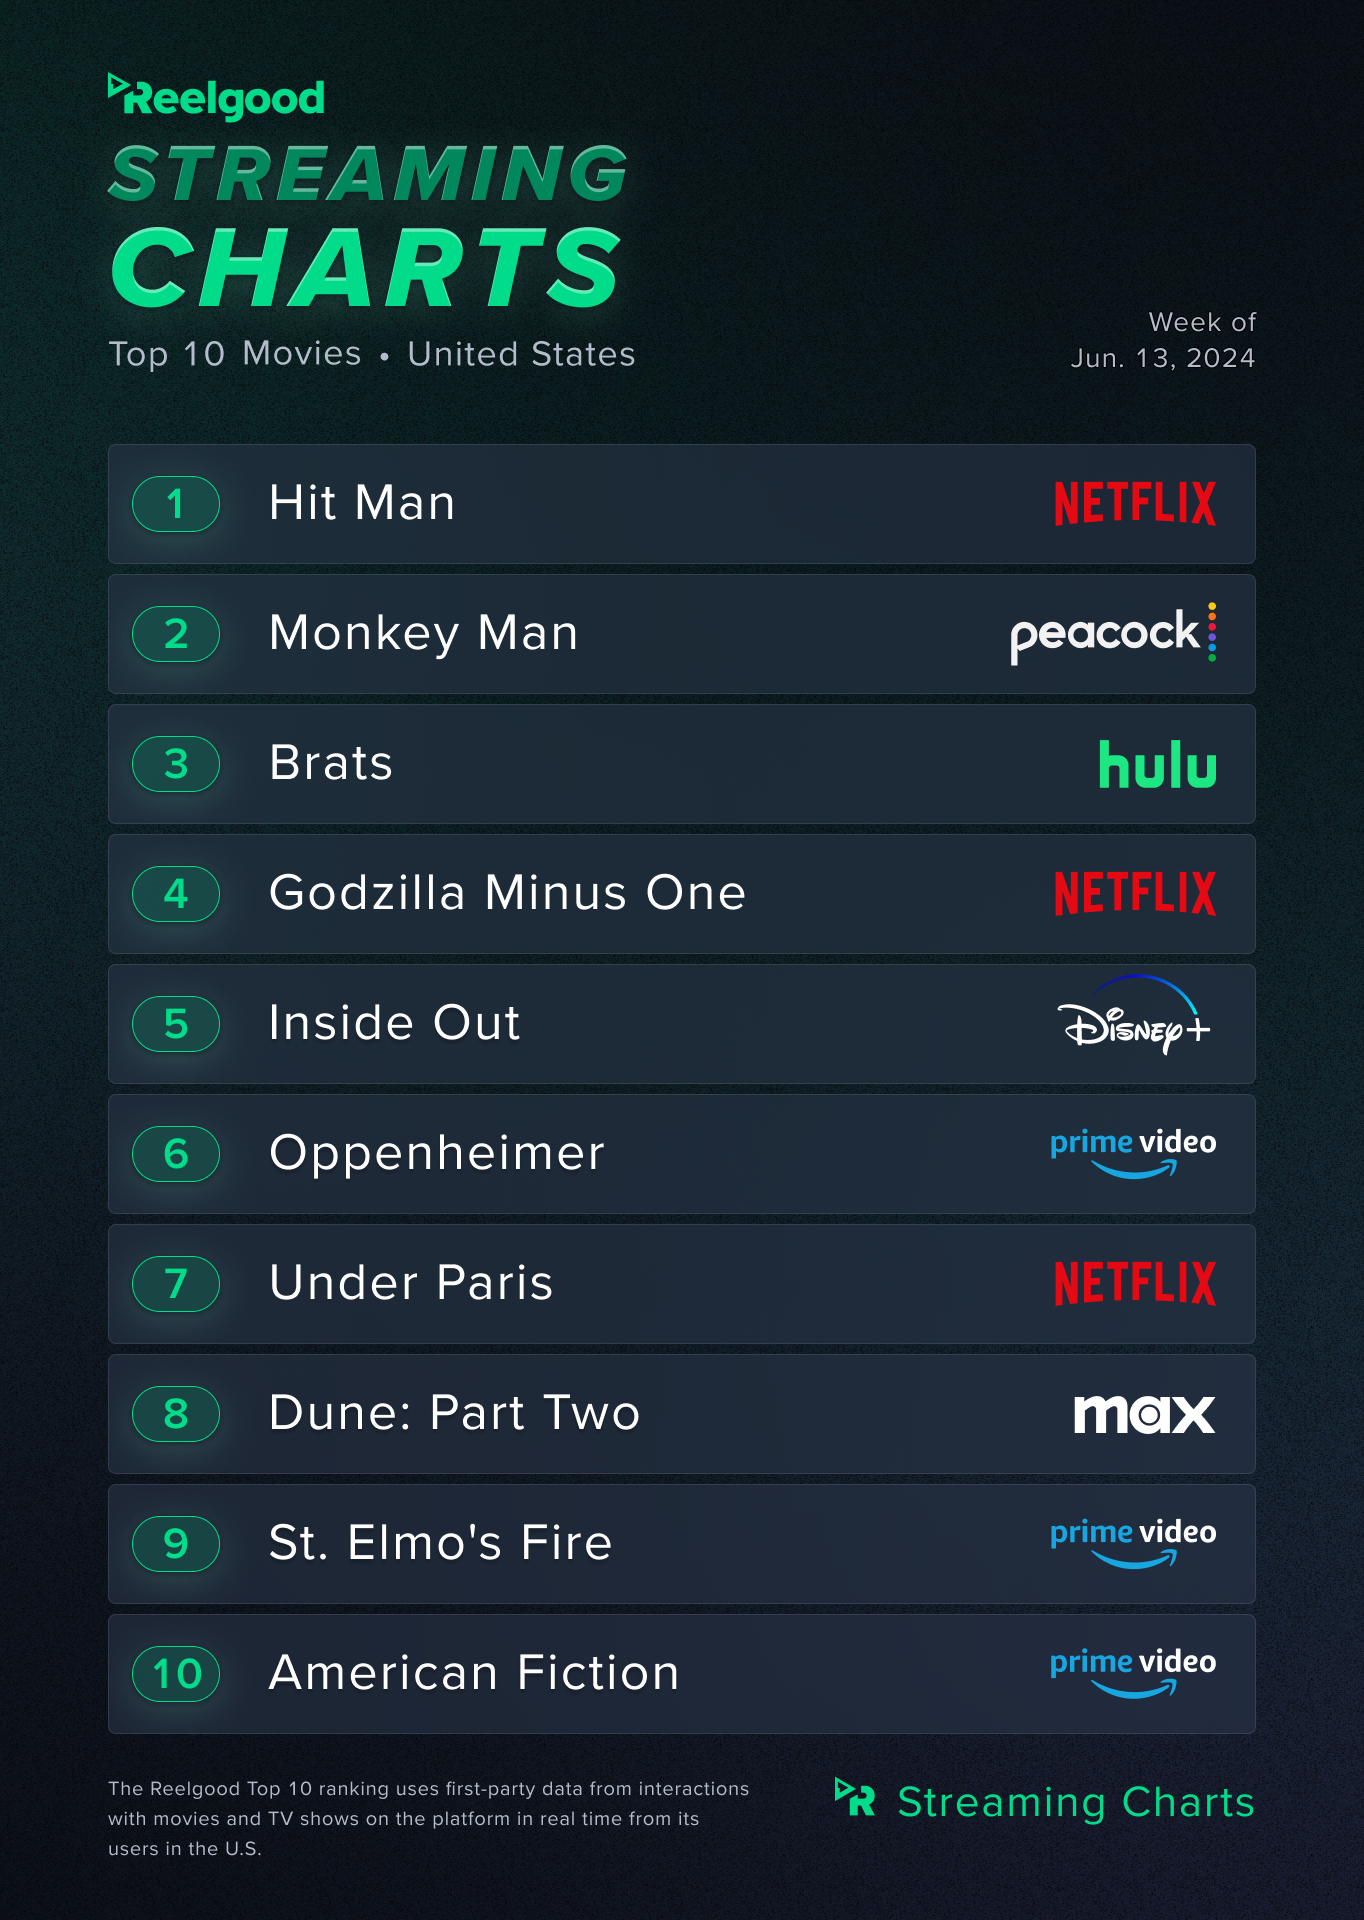 Reelgood Top 10 movies streaming chart for June 13-19